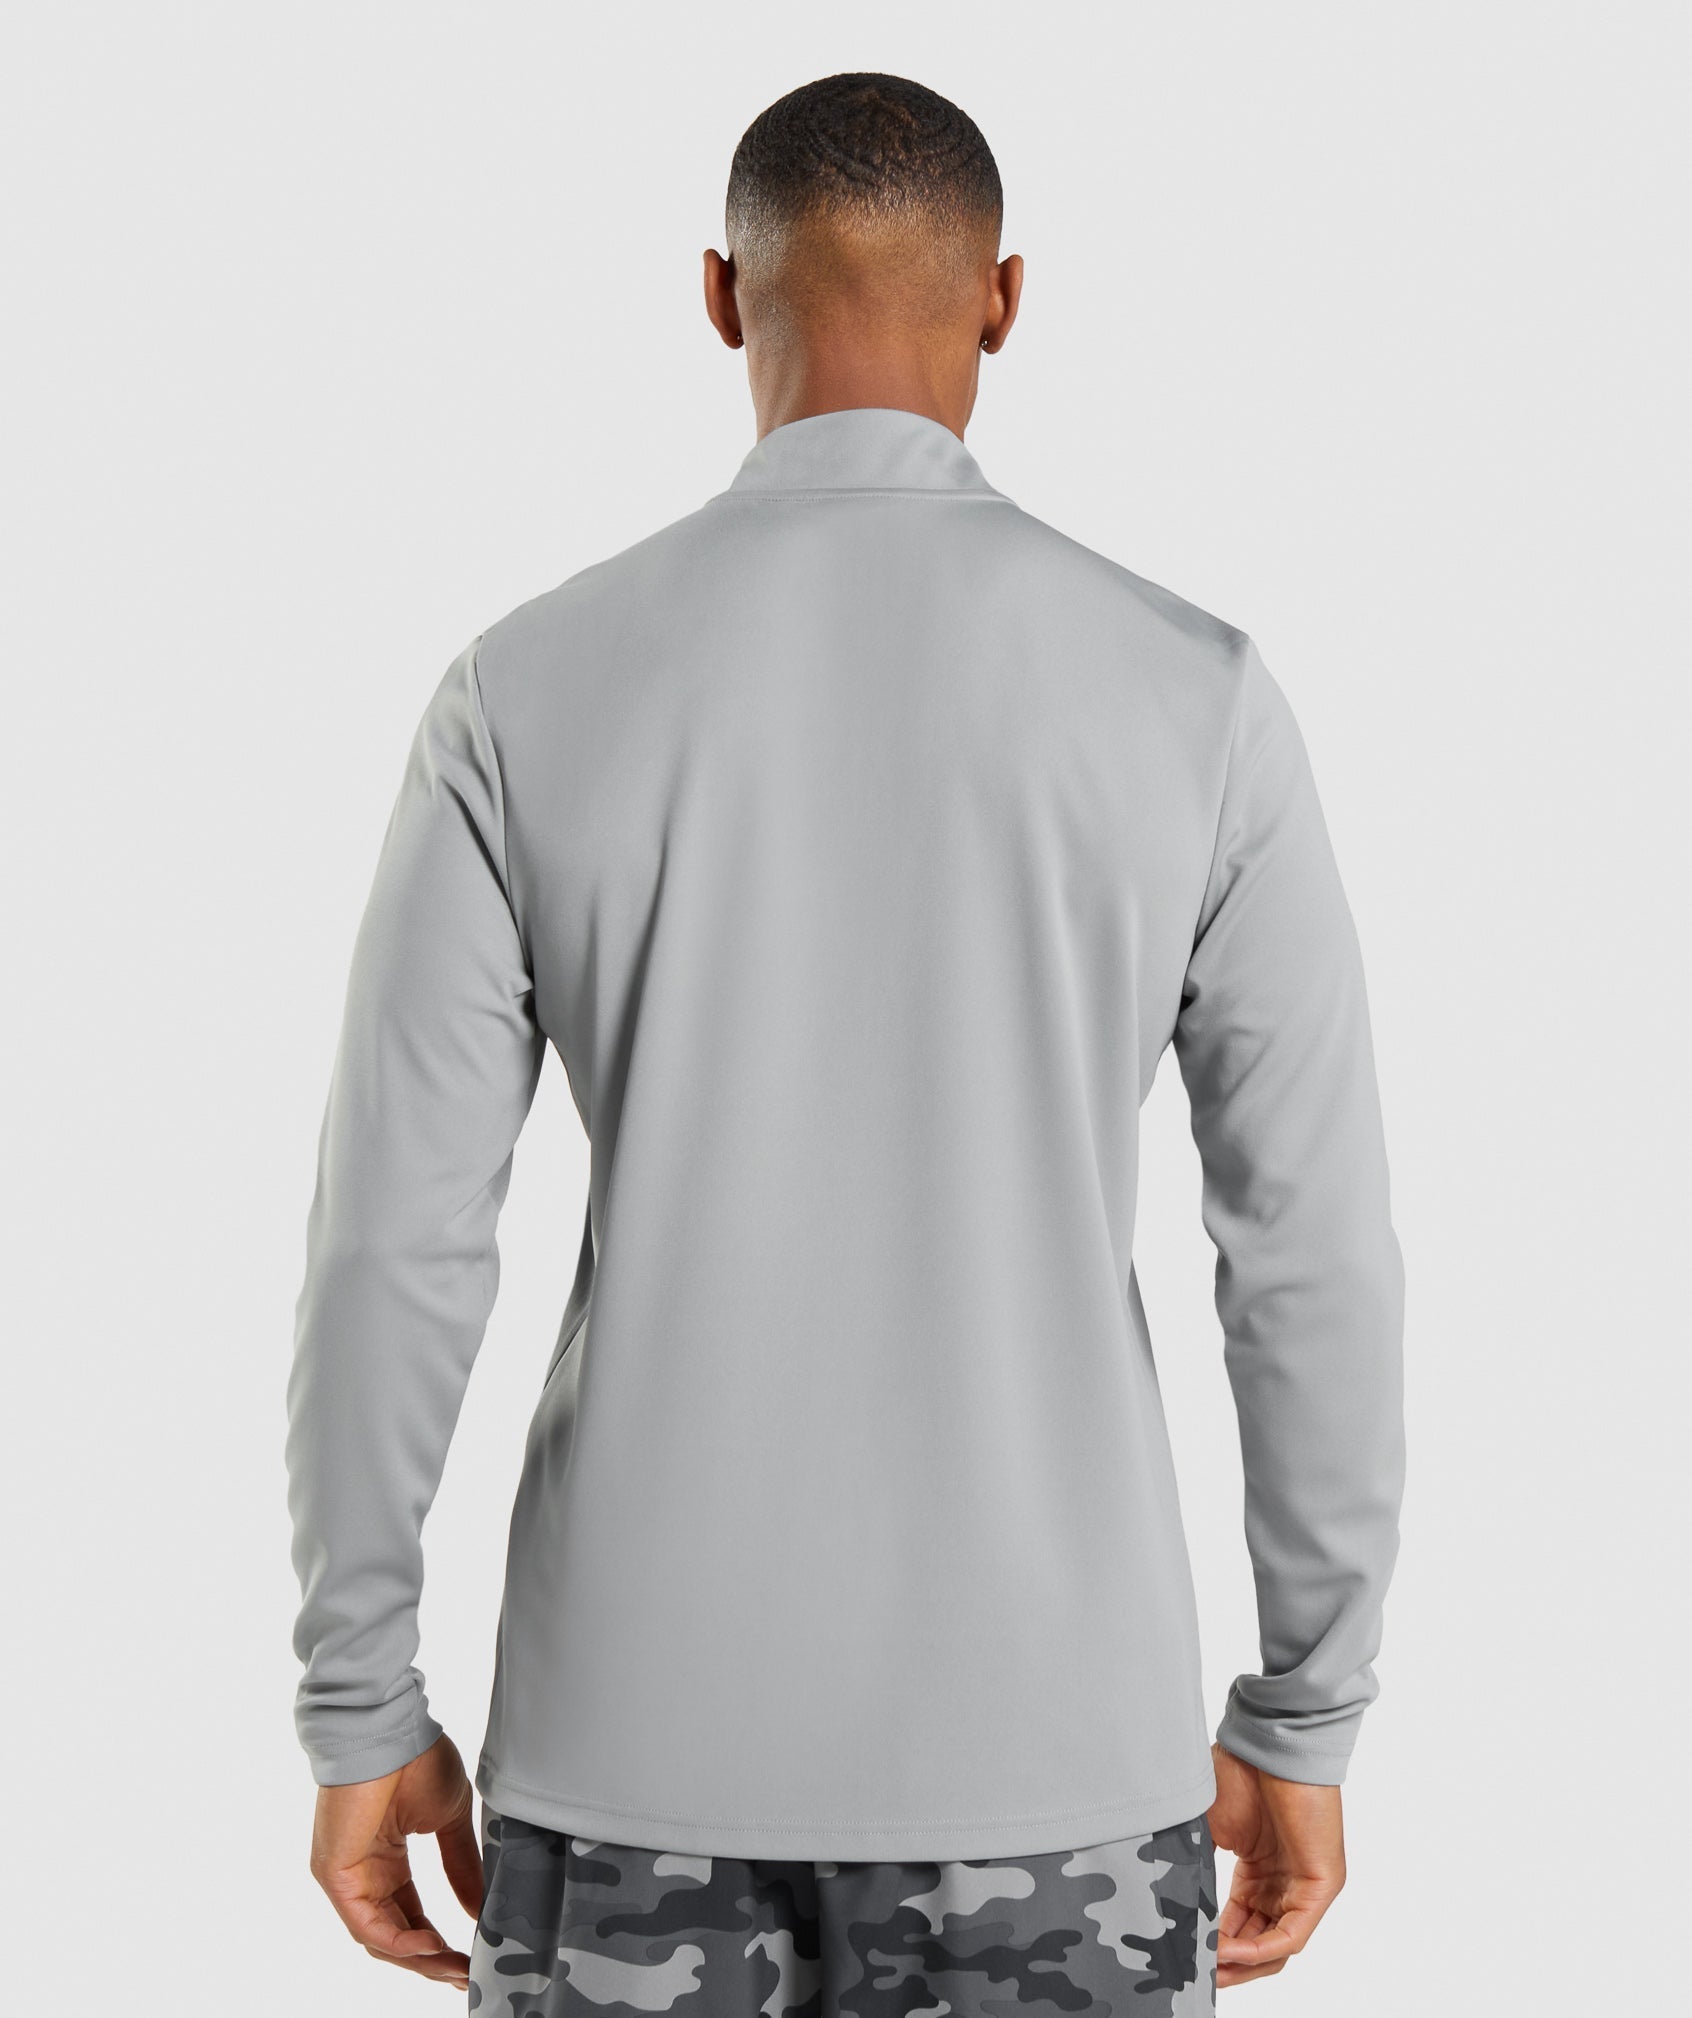 Arrival 1/4 Zip Pullover in Smokey Grey - view 3